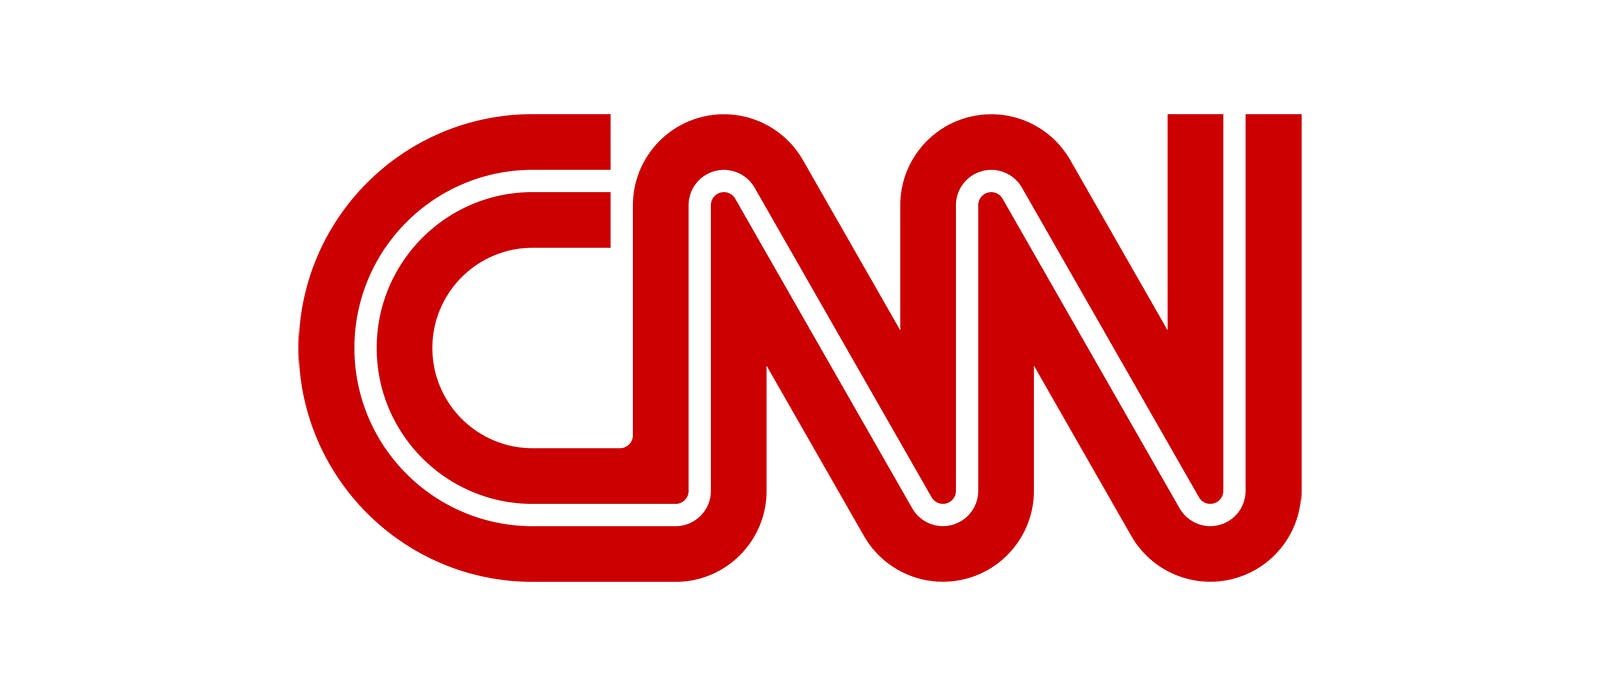 CNN Eyeing Its Own Streaming Service With Exclusive, New Content